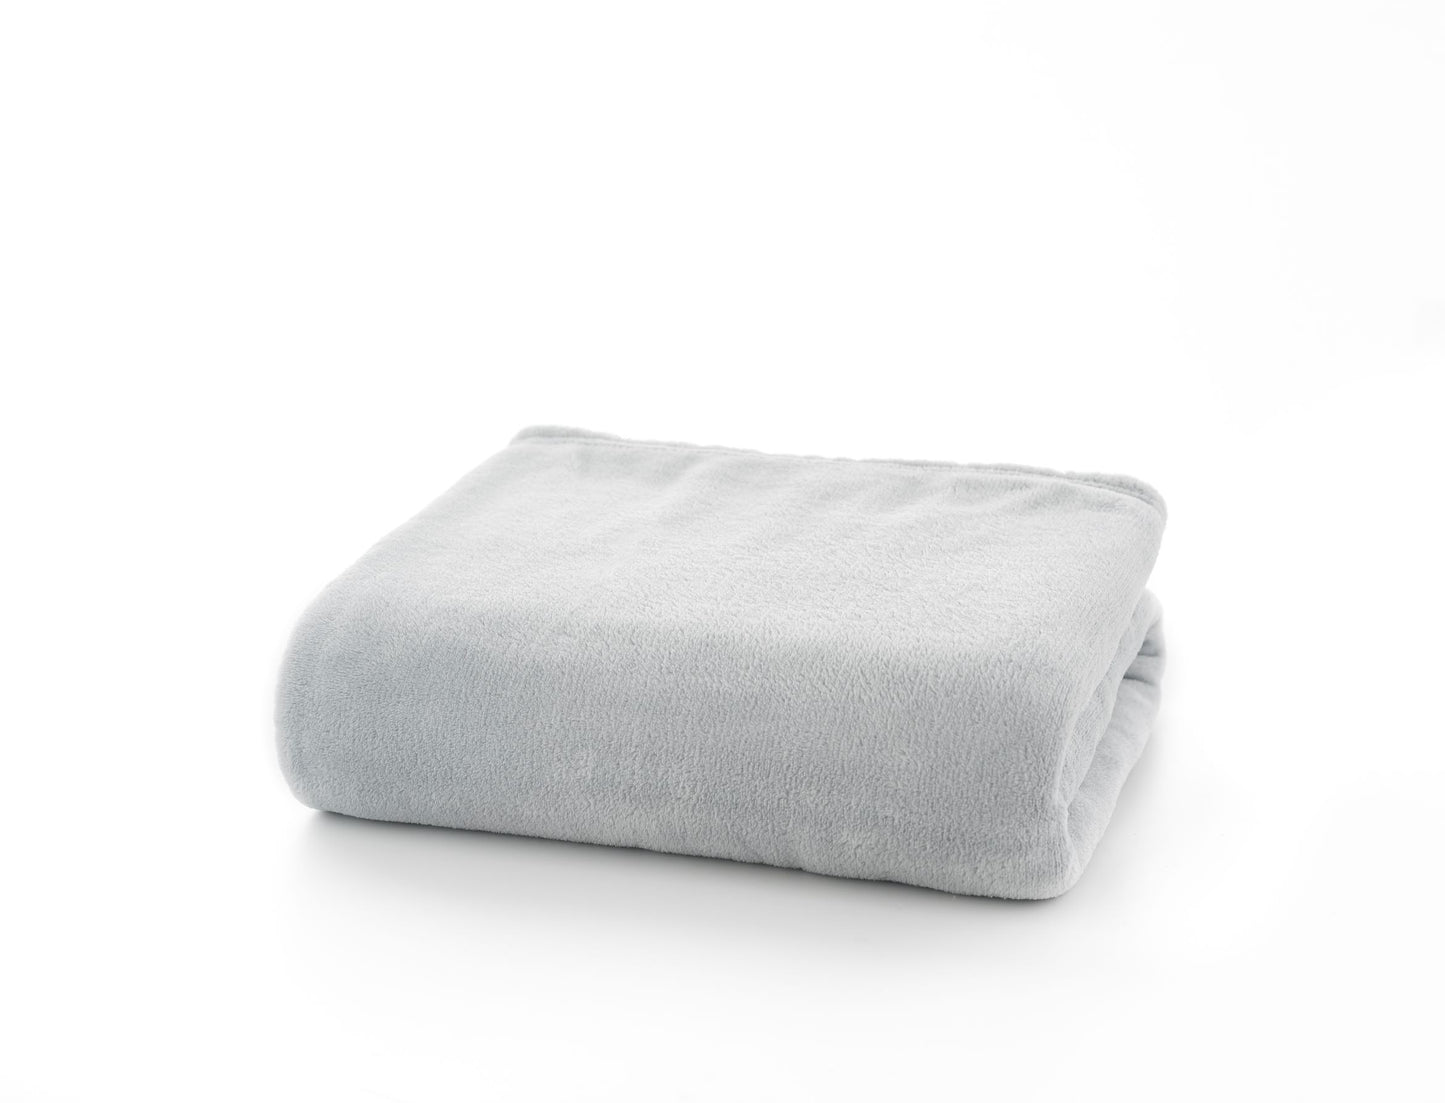 Snuggletouch Supersoft Throw in Silver Grey